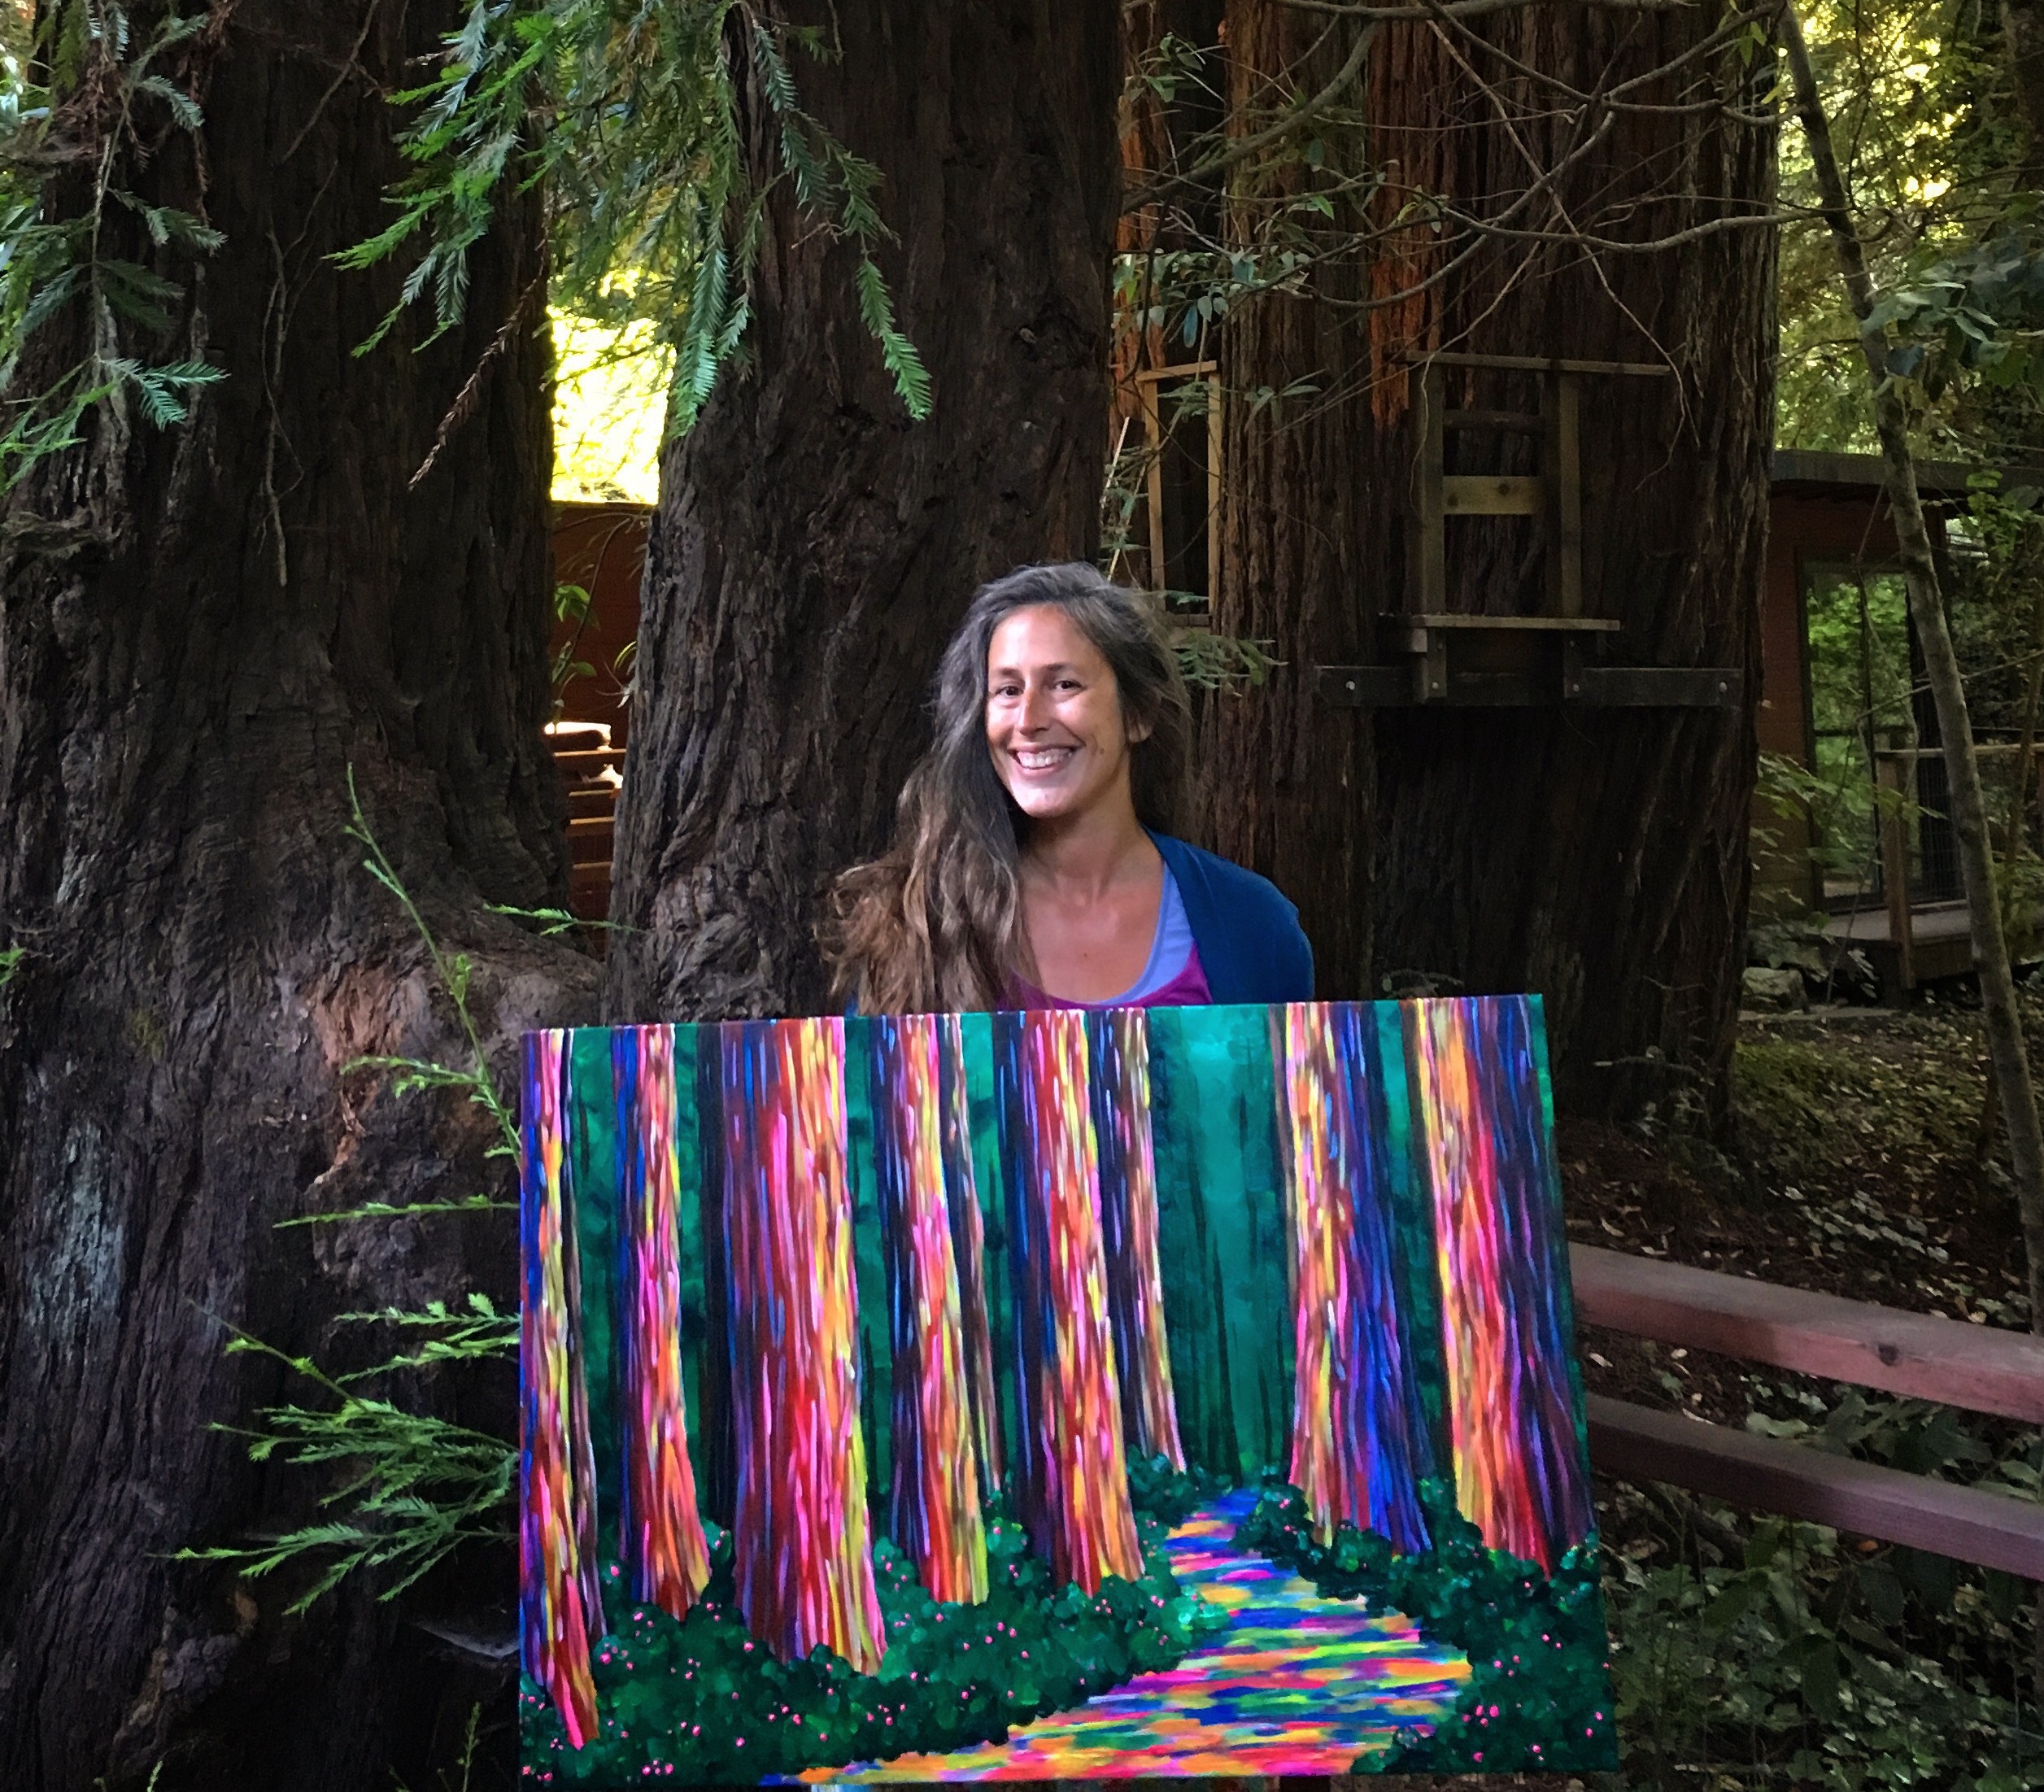 A woman stands among large trees holding a painting of colorful trees and a path.